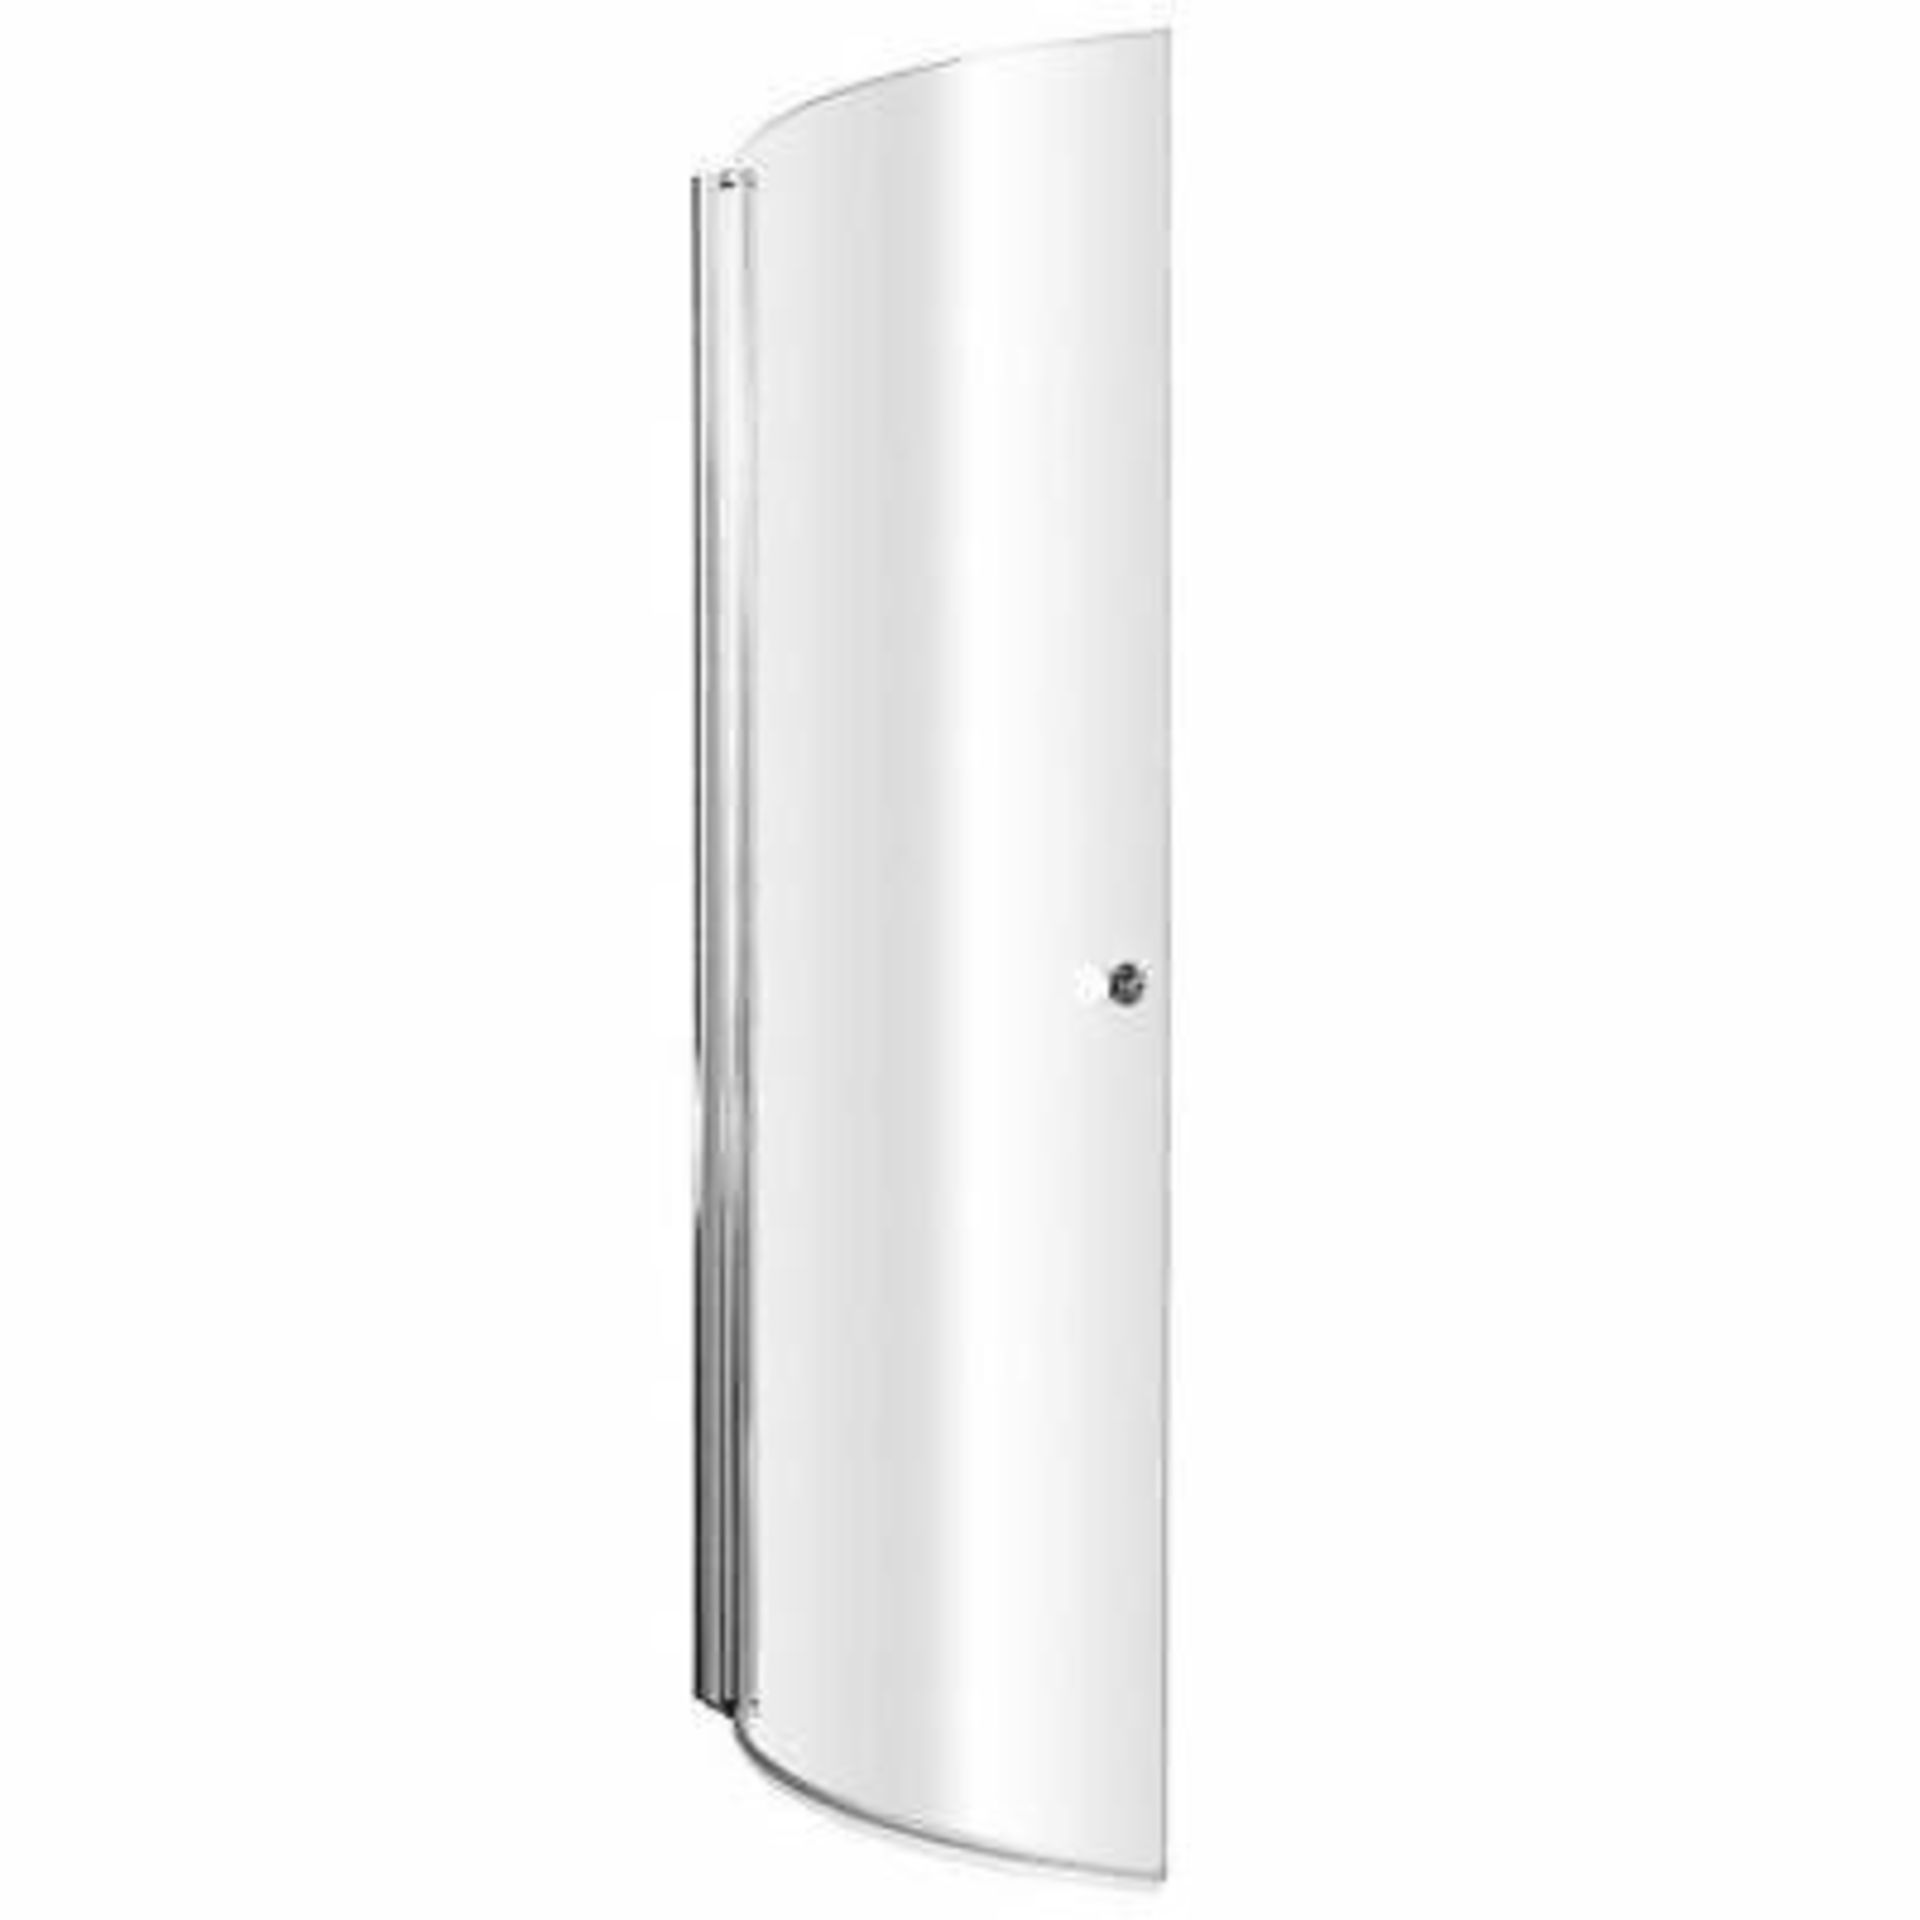 BATHSTORE LIBERTY UNIVERSAL FITTING HIGH QUALITY ‘RISE & FALL’ CURVED BATH SHOWER SCREEN RRP £475